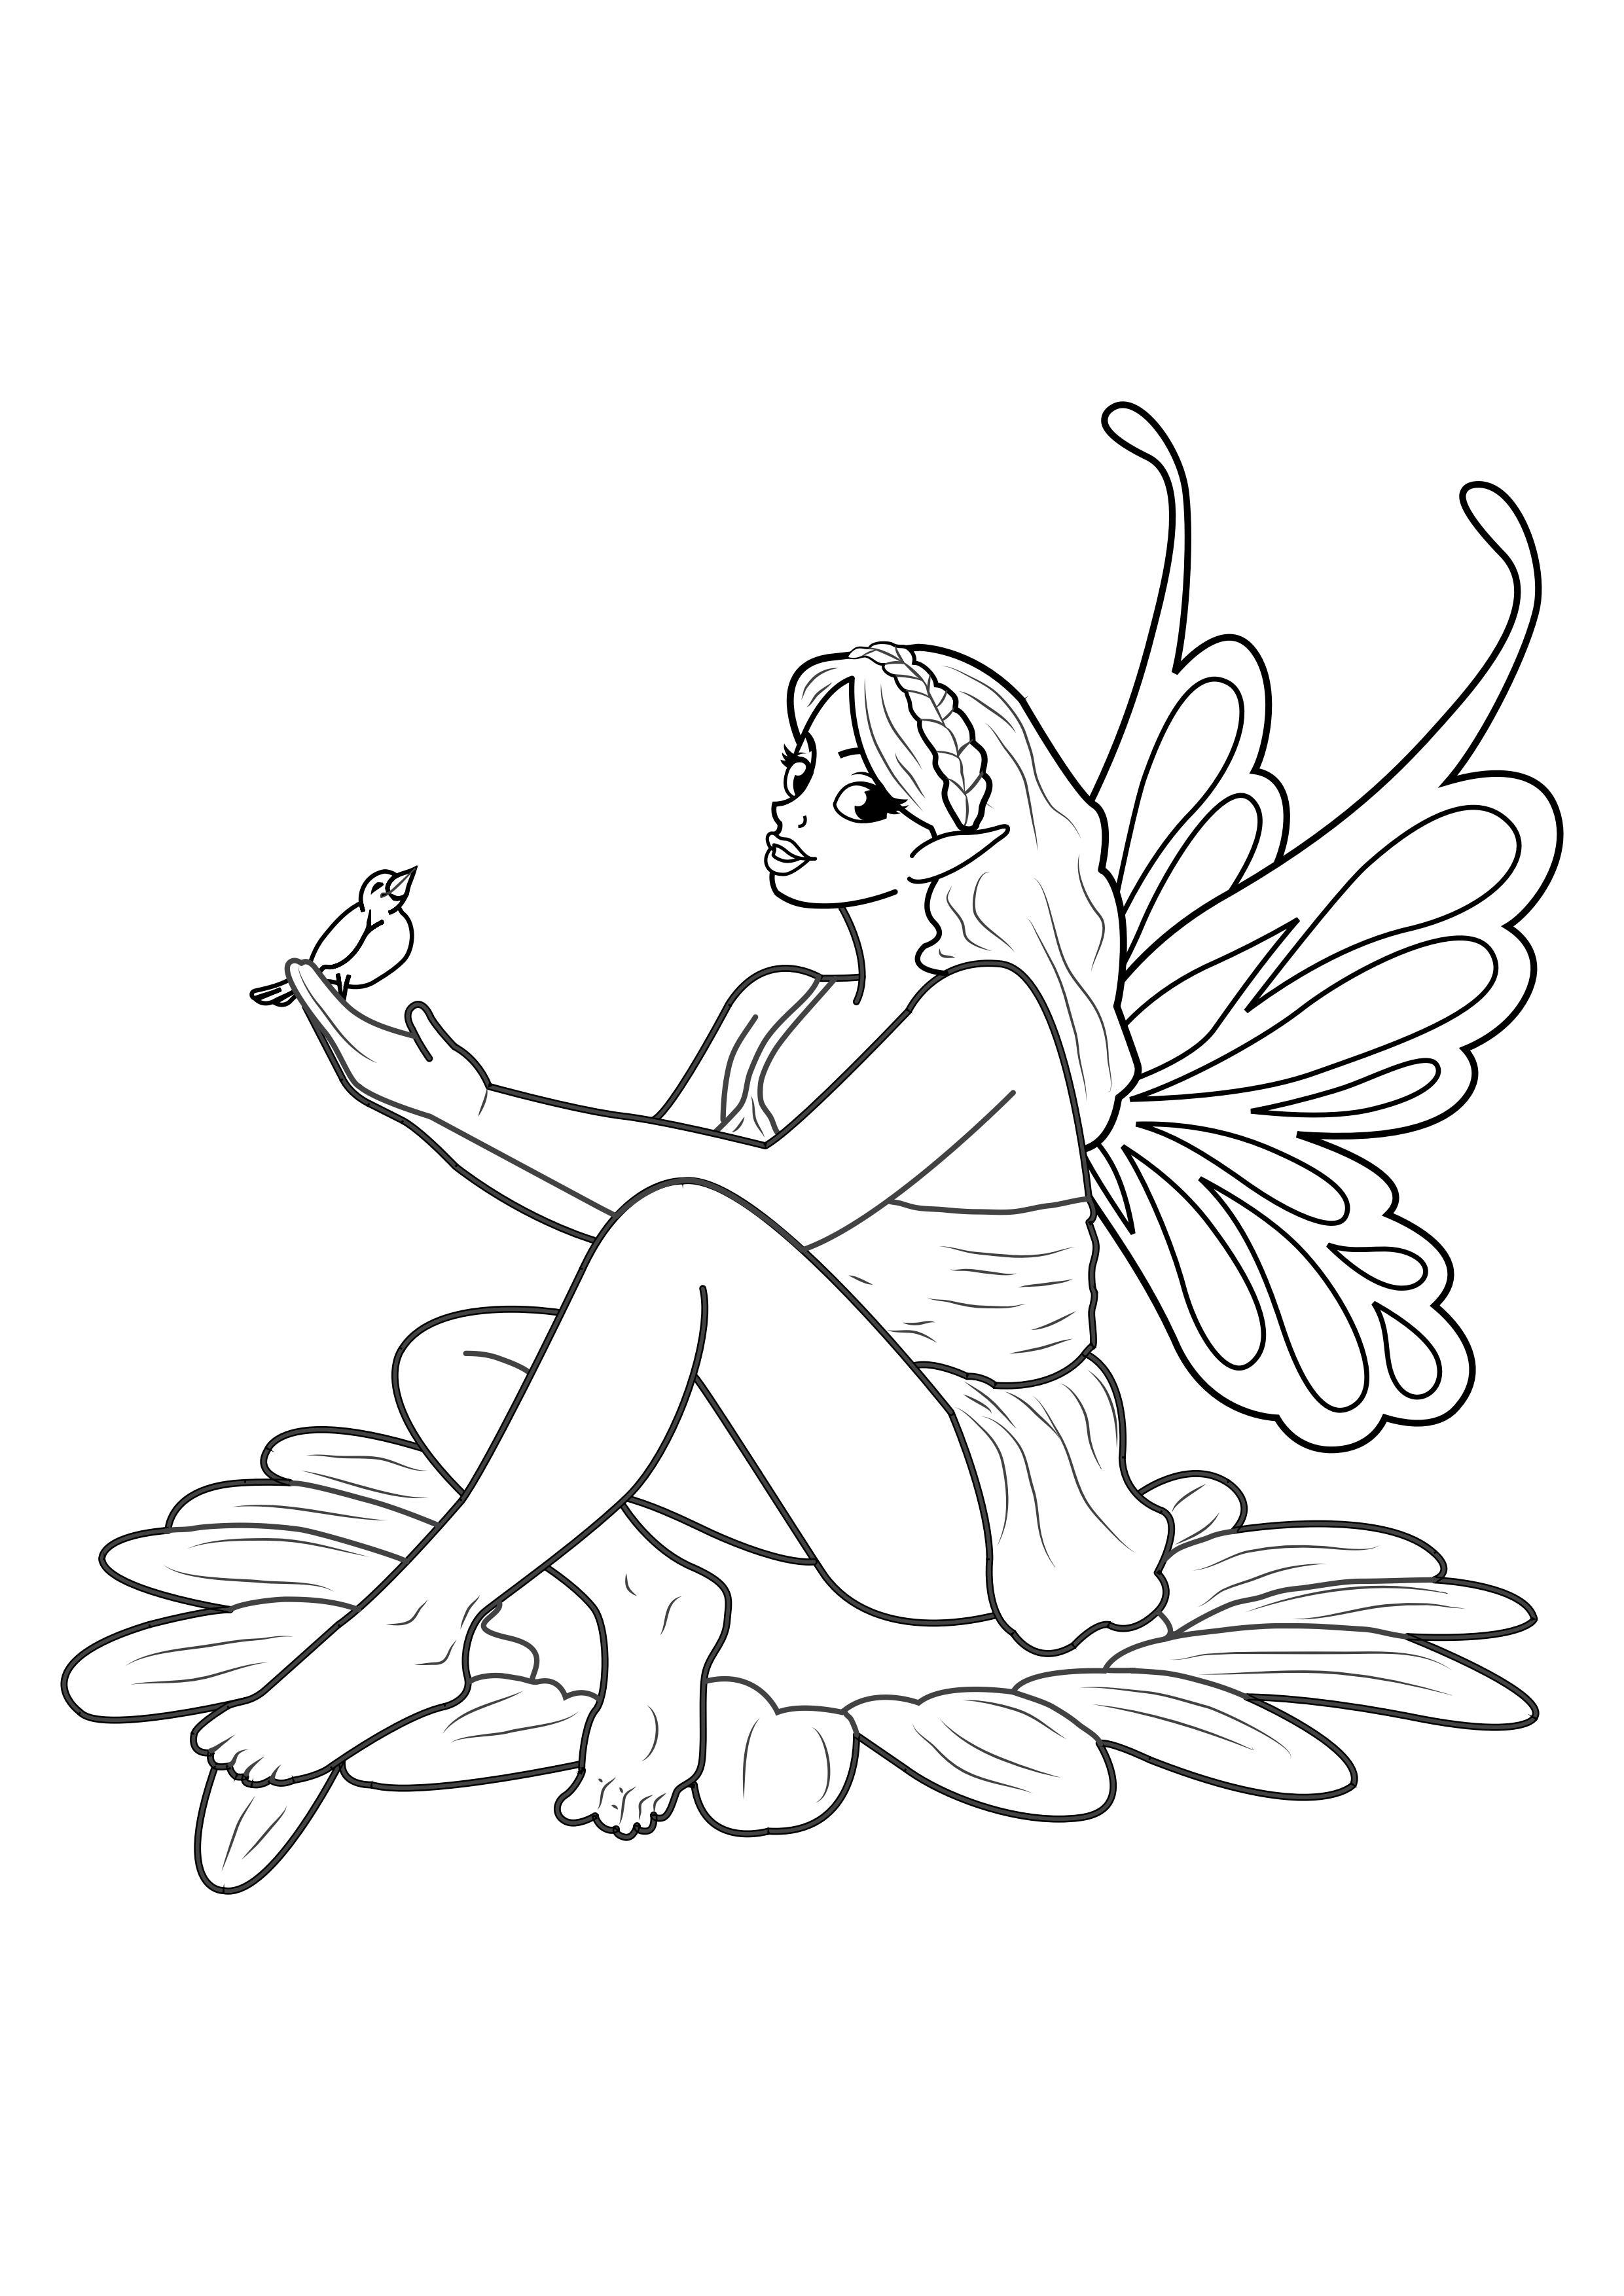 Coloring page fairy with bird